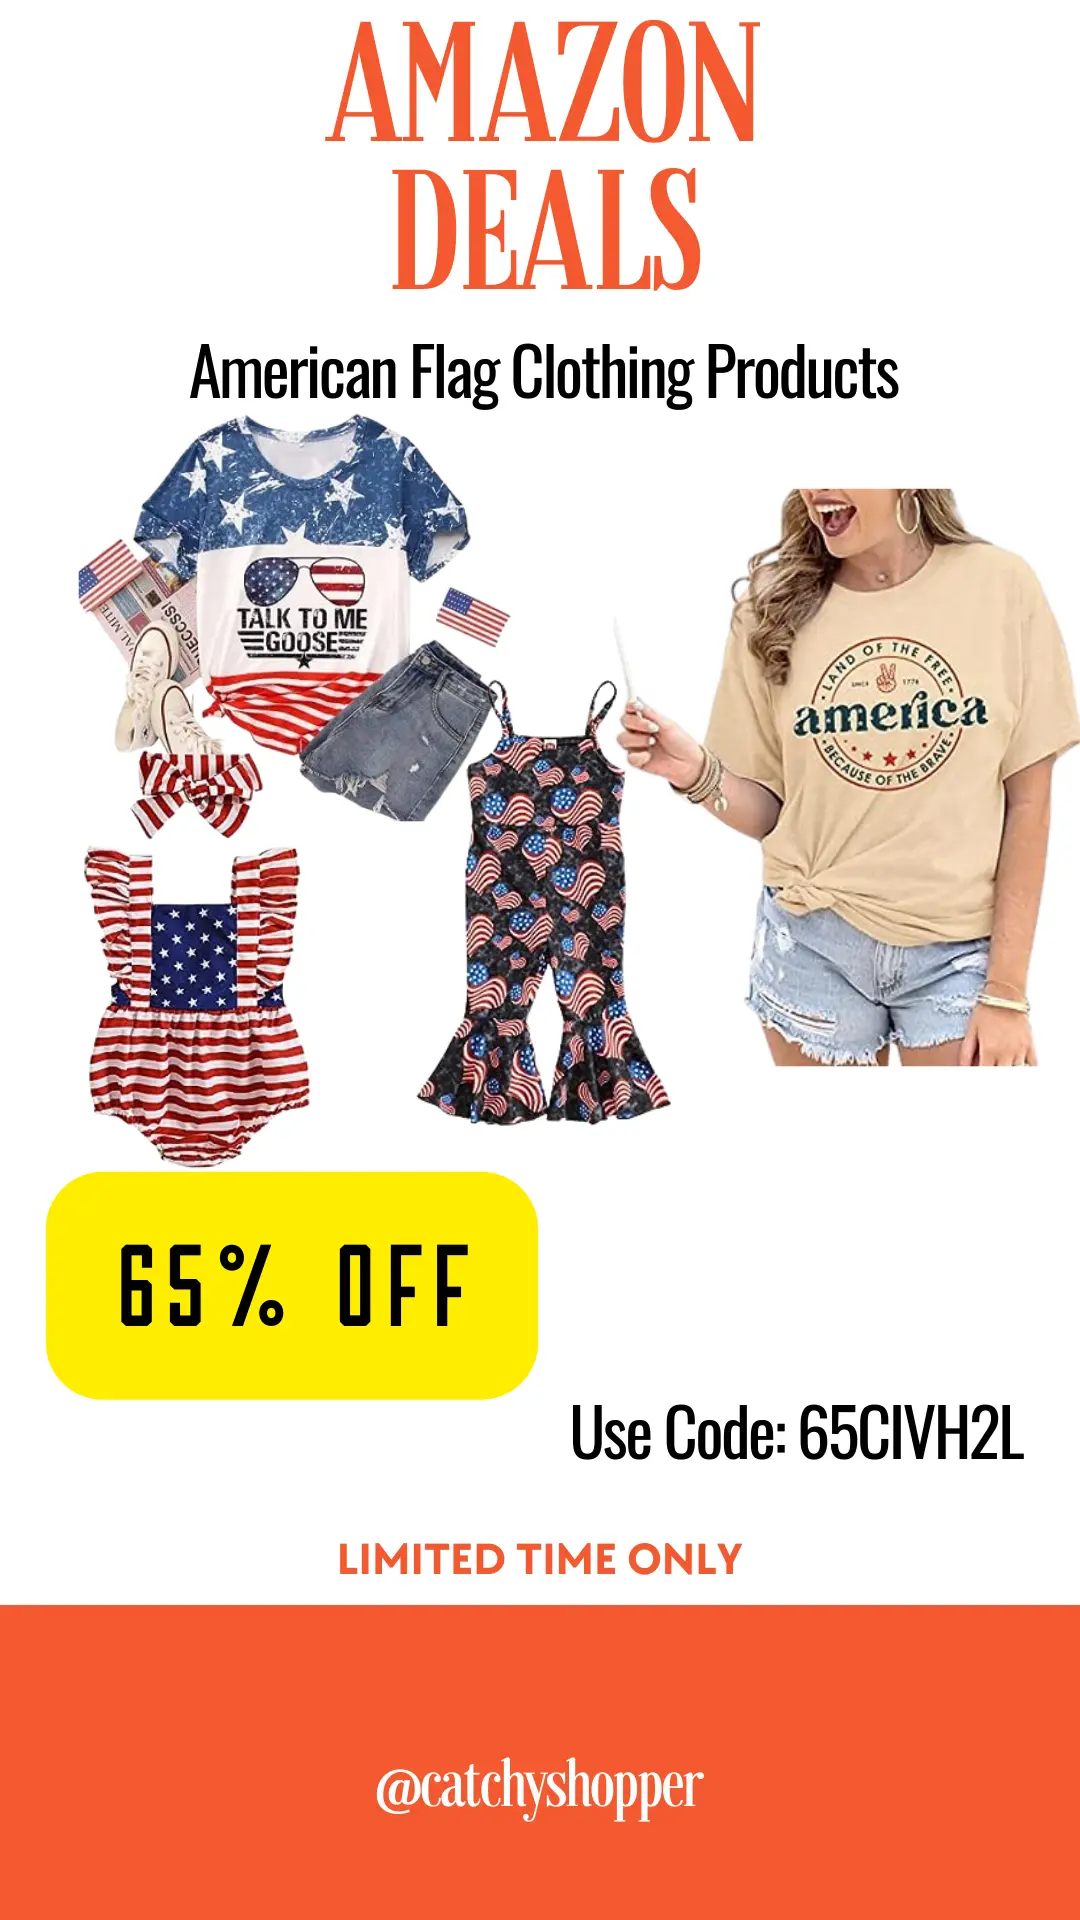 American Flag Clothing Products